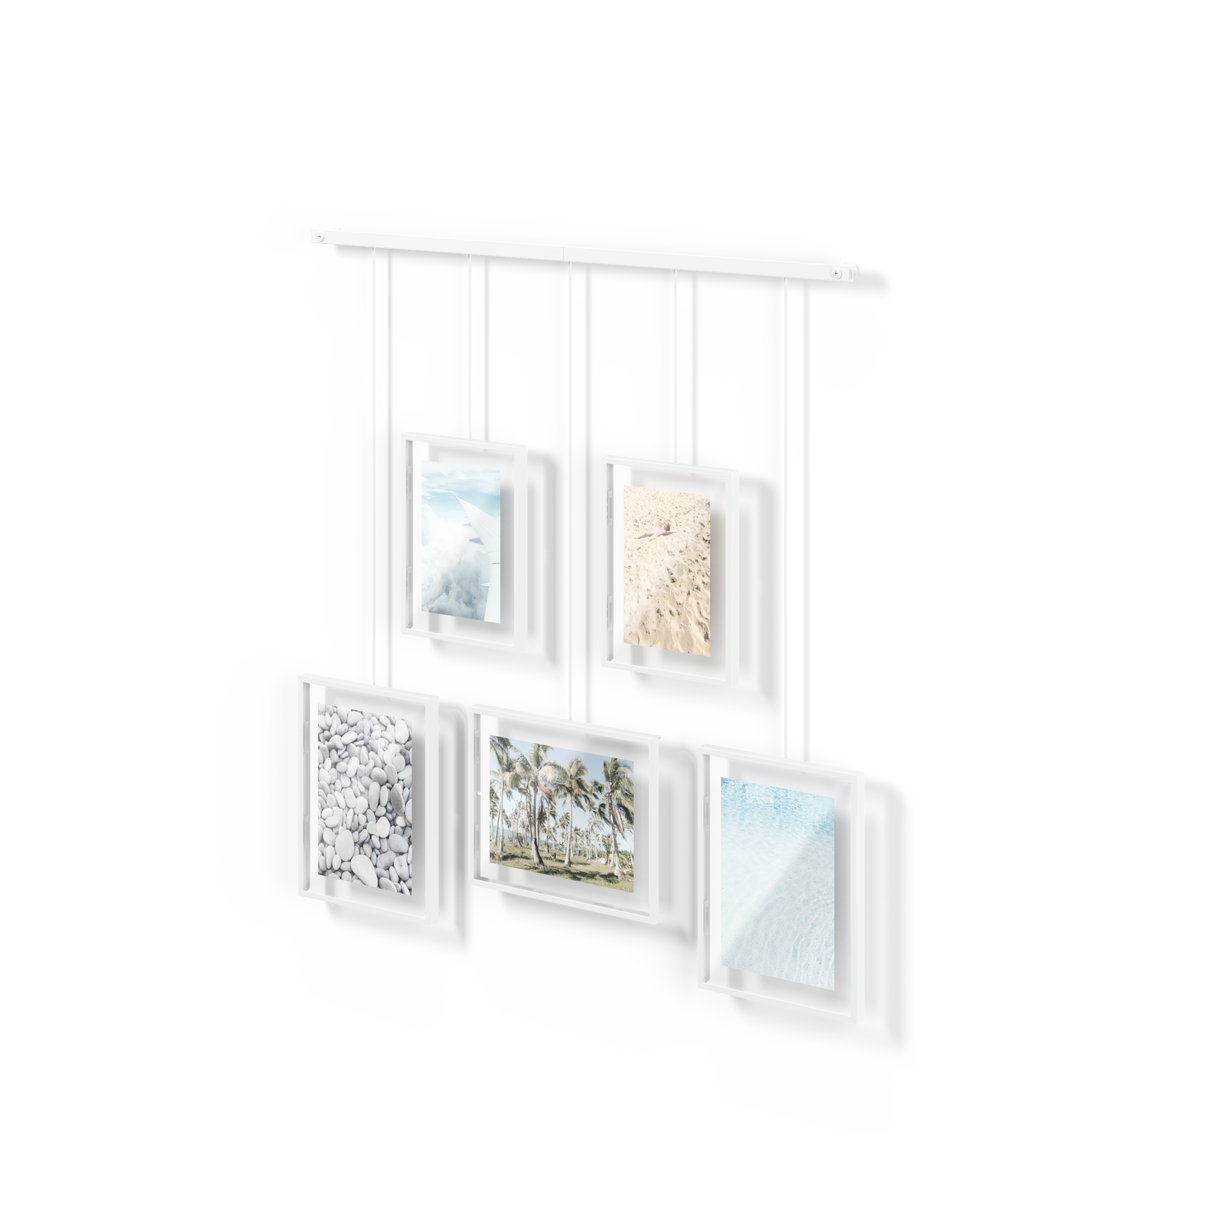 Umbra Exhibit Picture Frame Gallery Set Adjustable Collage Display for 5 Photos, Prints, Artwork & More